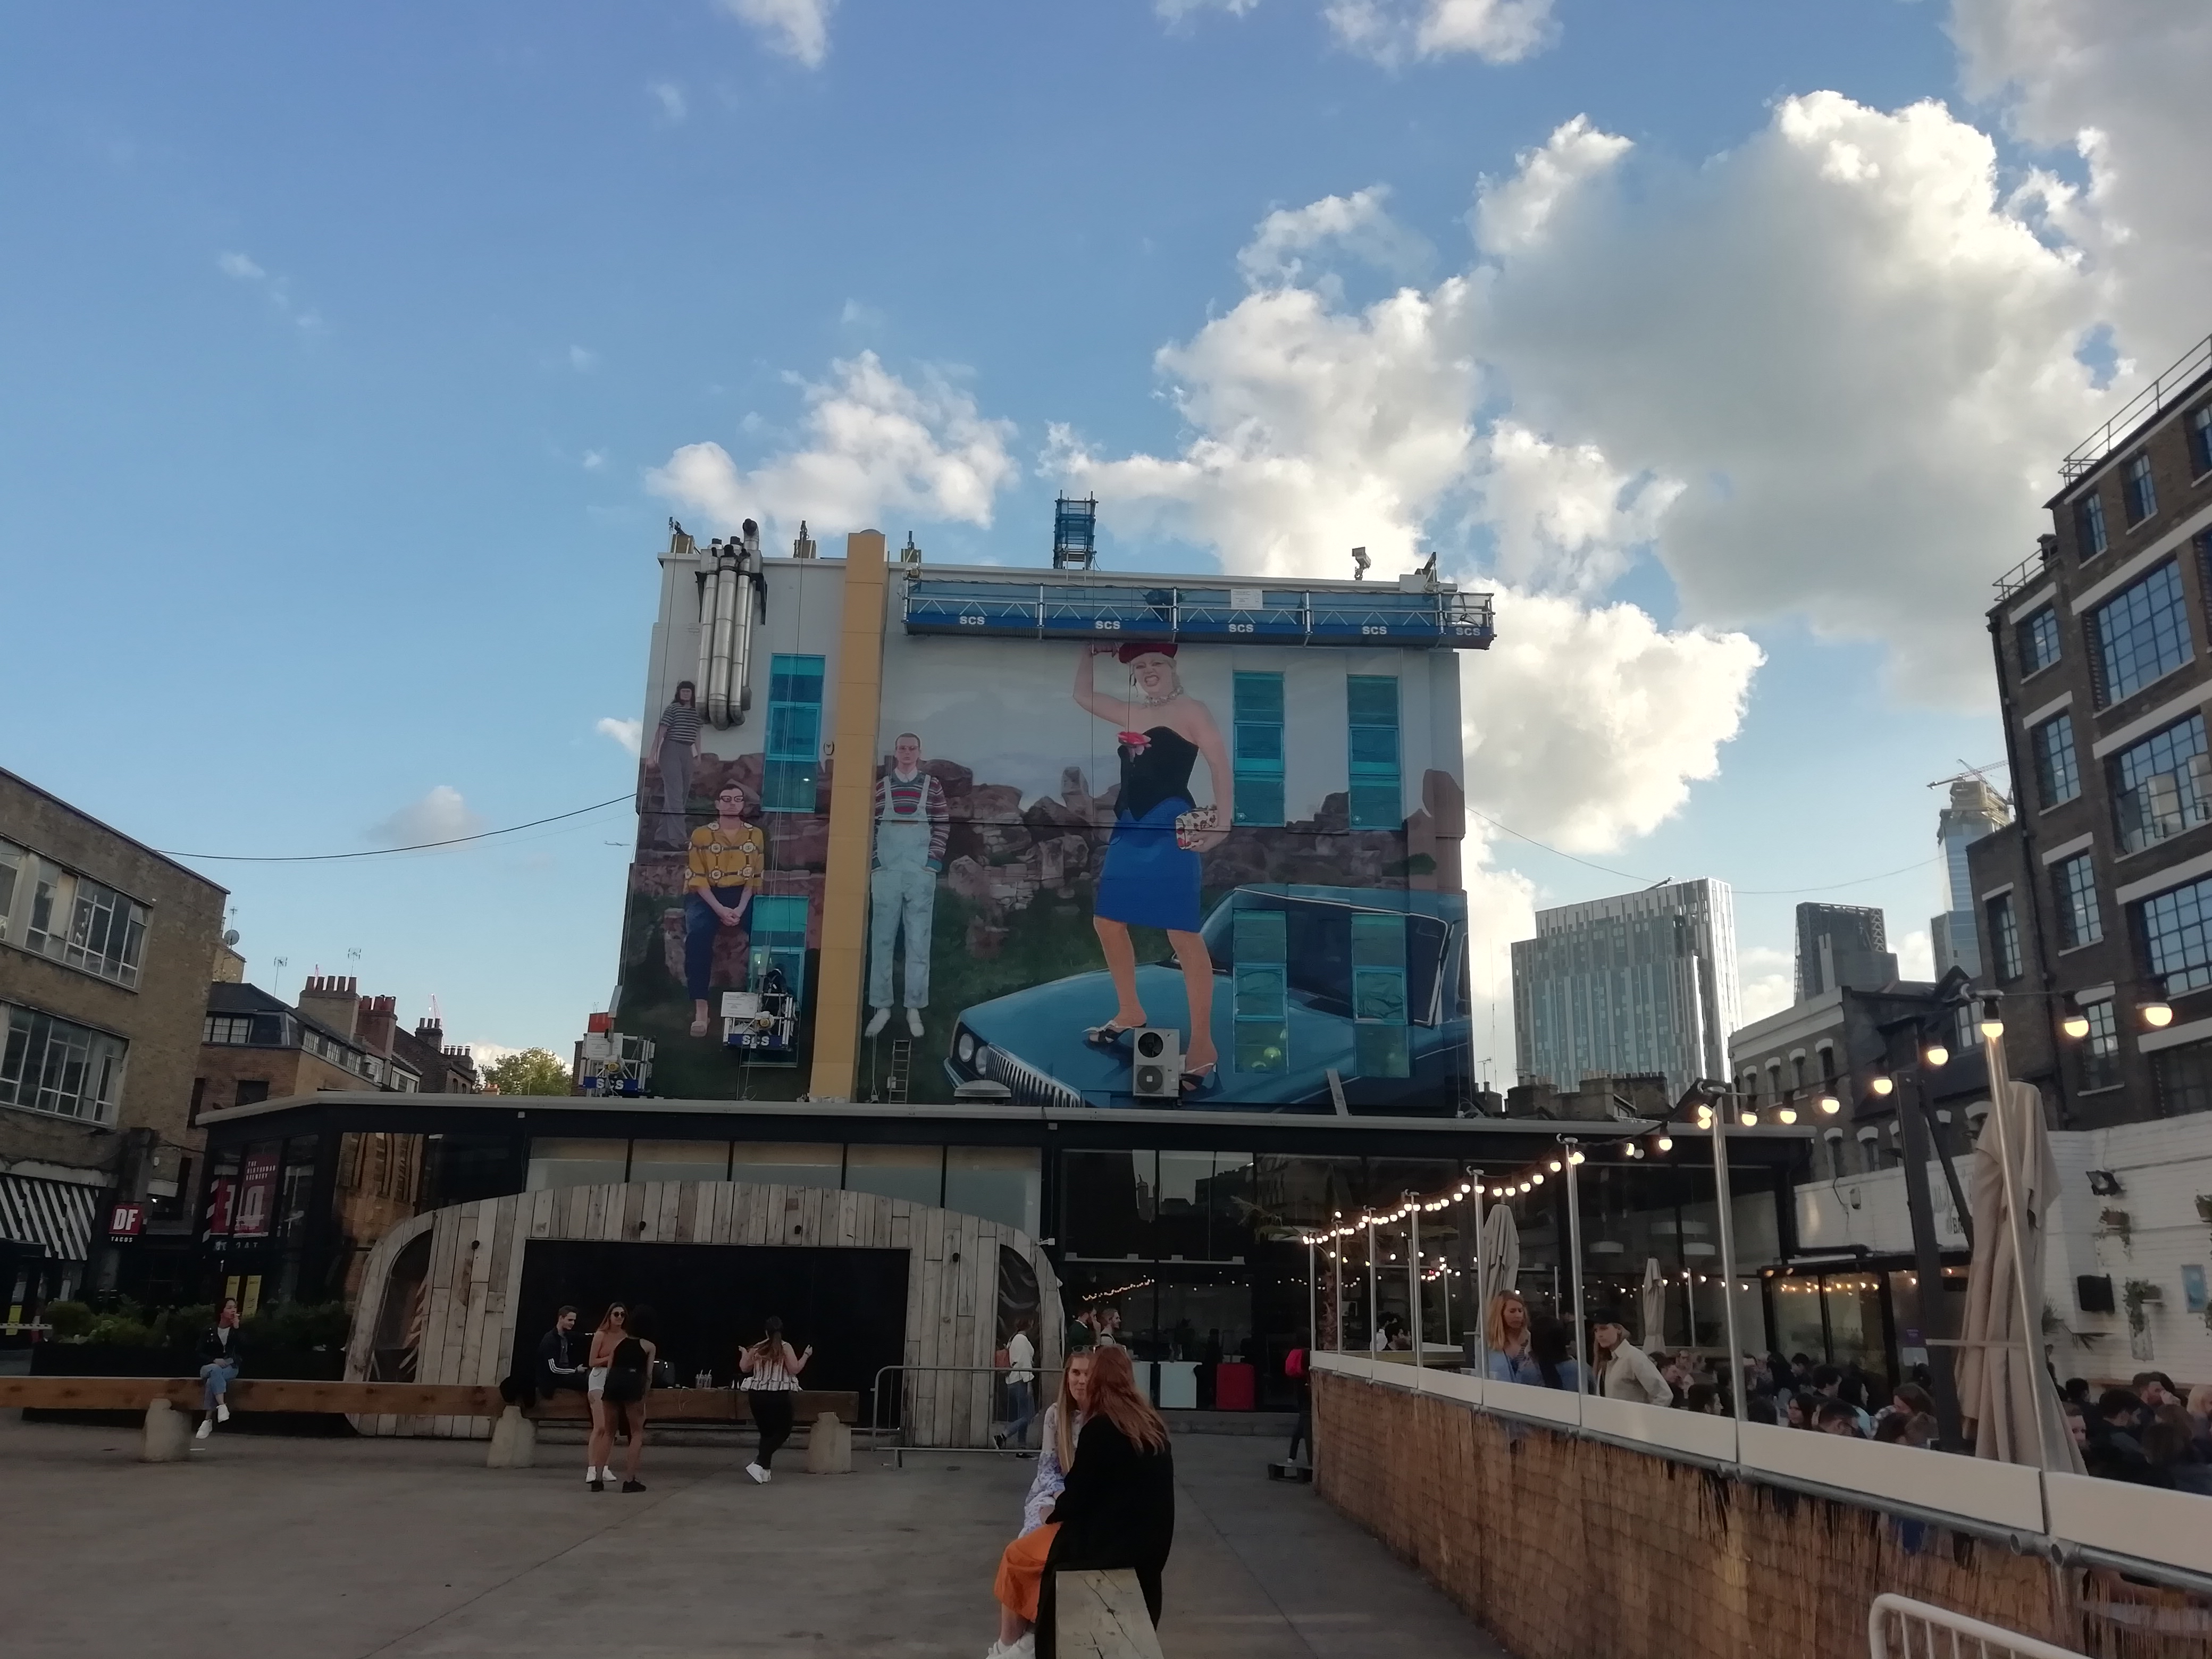 Mural Gucci x Amyl & The Sniffers | Ely's Yard, Shoreditch